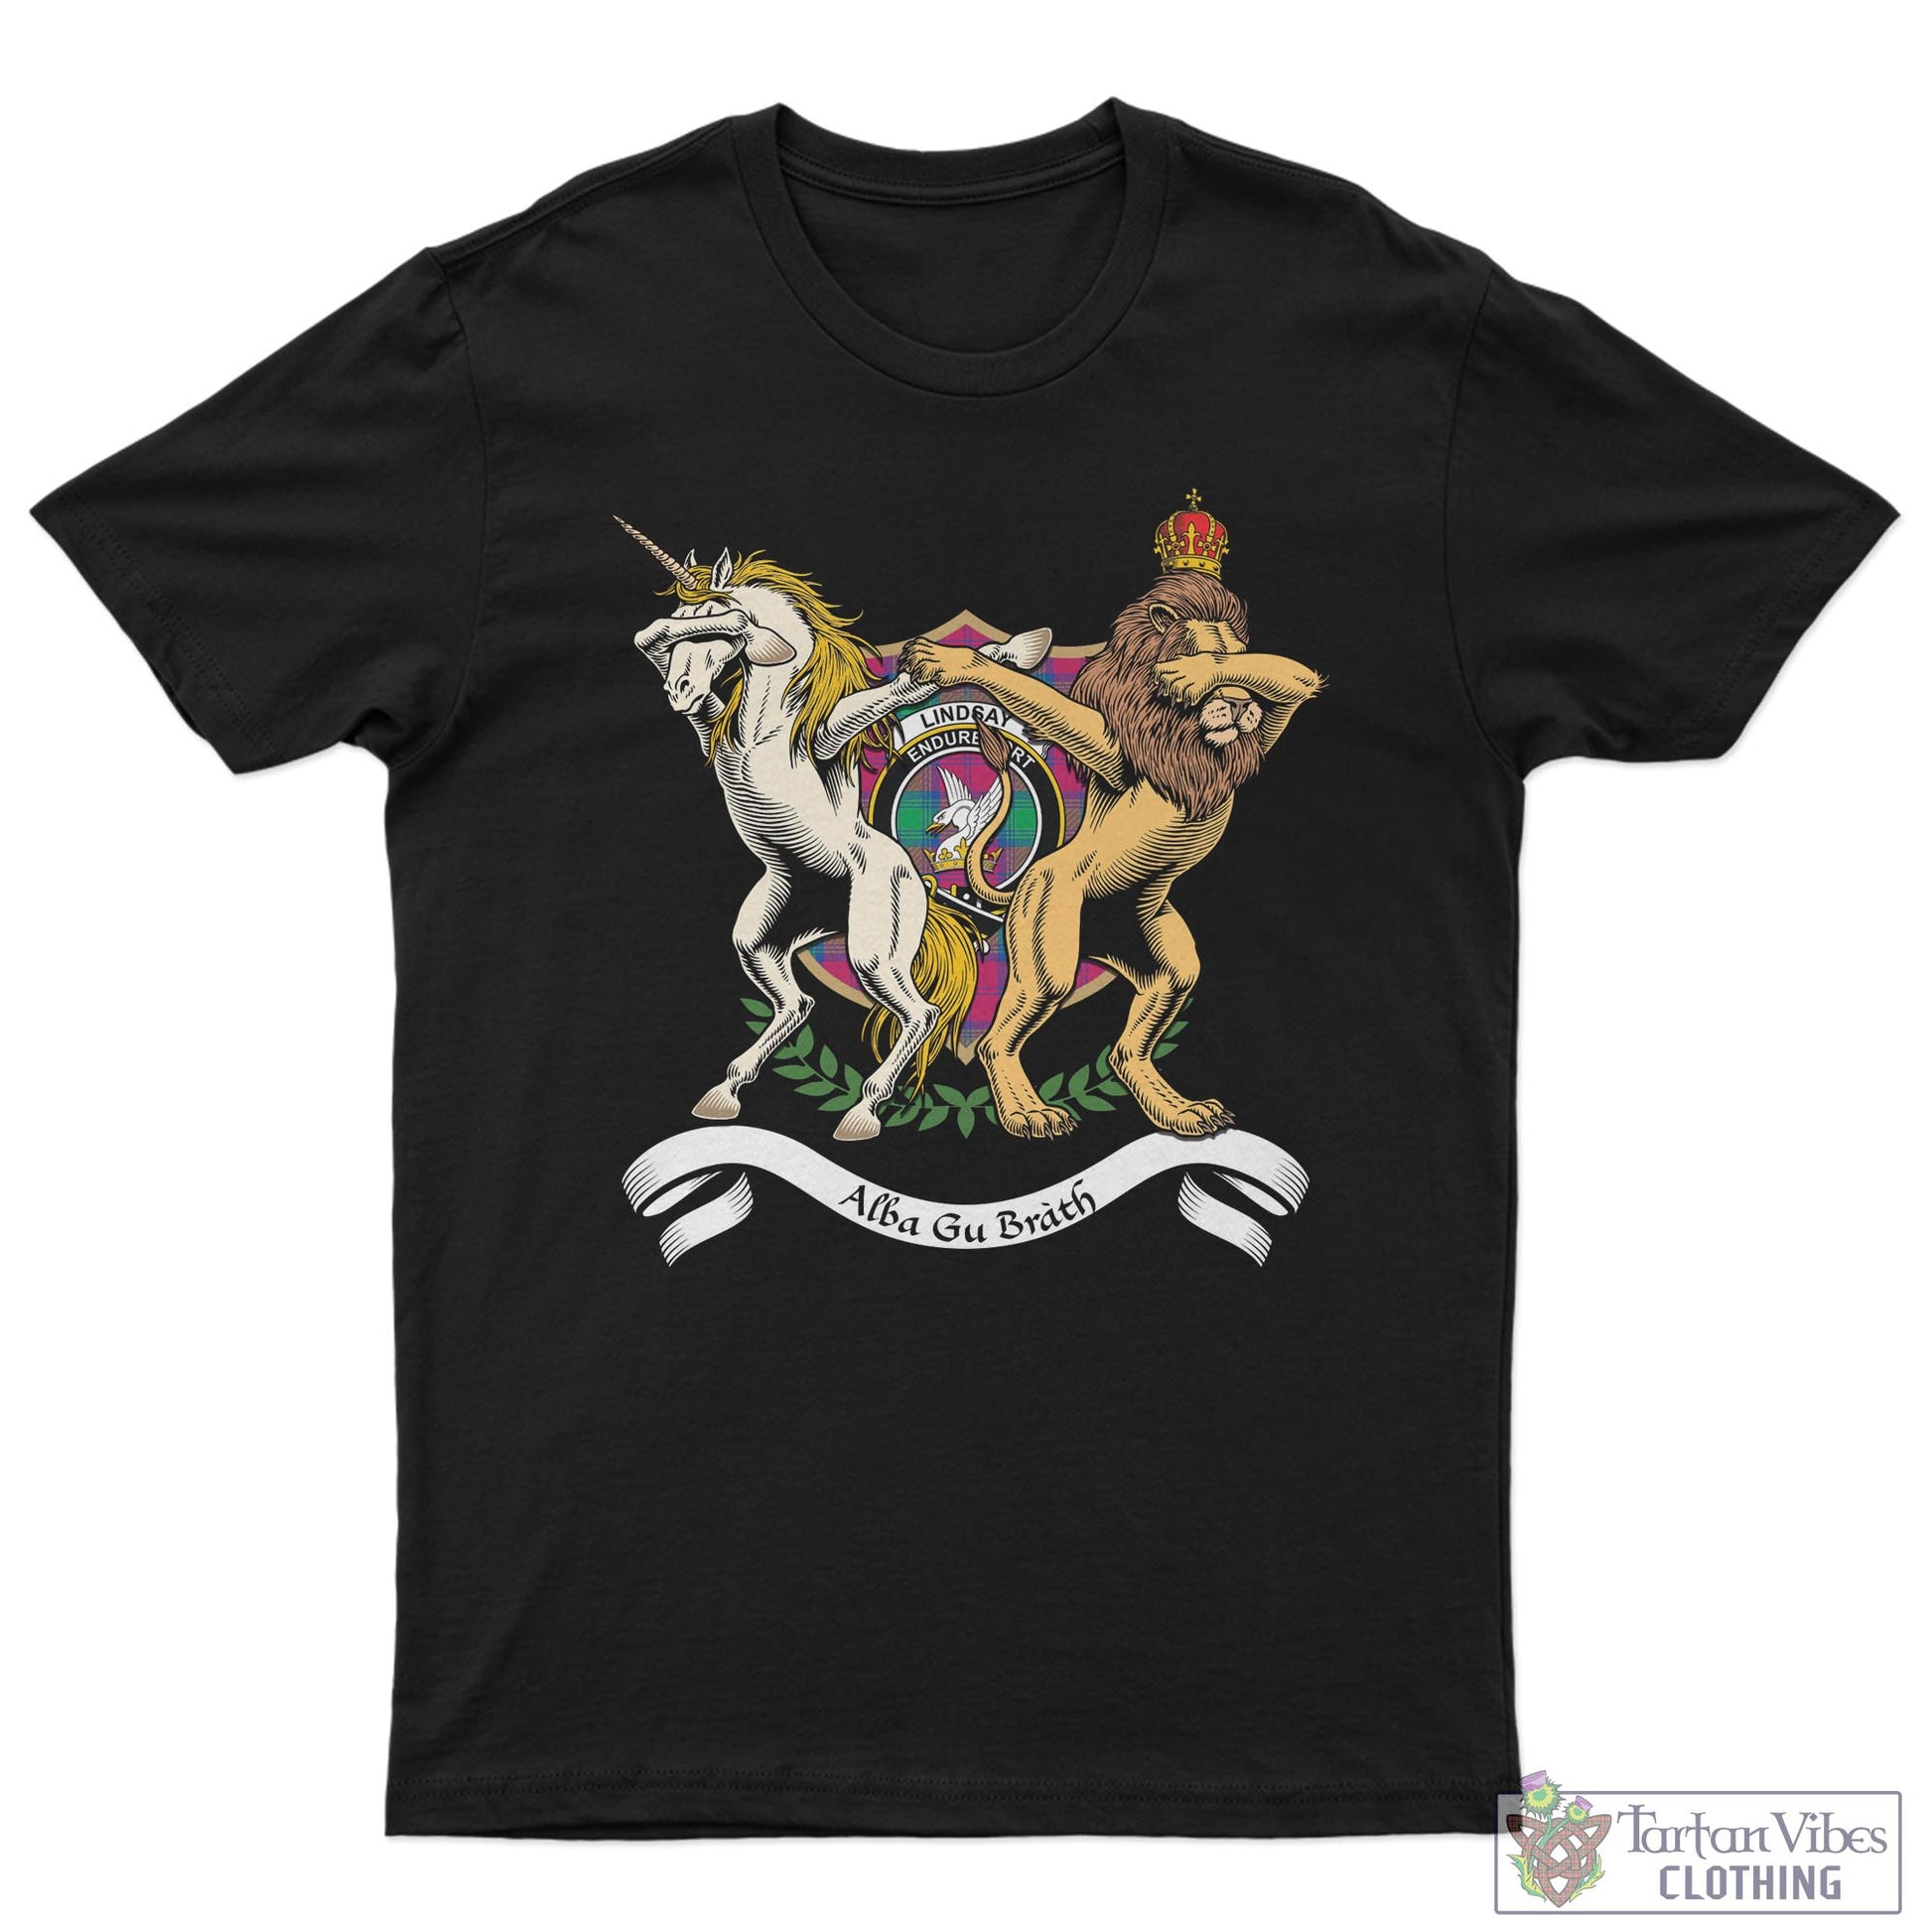 Tartan Vibes Clothing Lindsay Ancient Family Crest Cotton Men's T-Shirt with Scotland Royal Coat Of Arm Funny Style